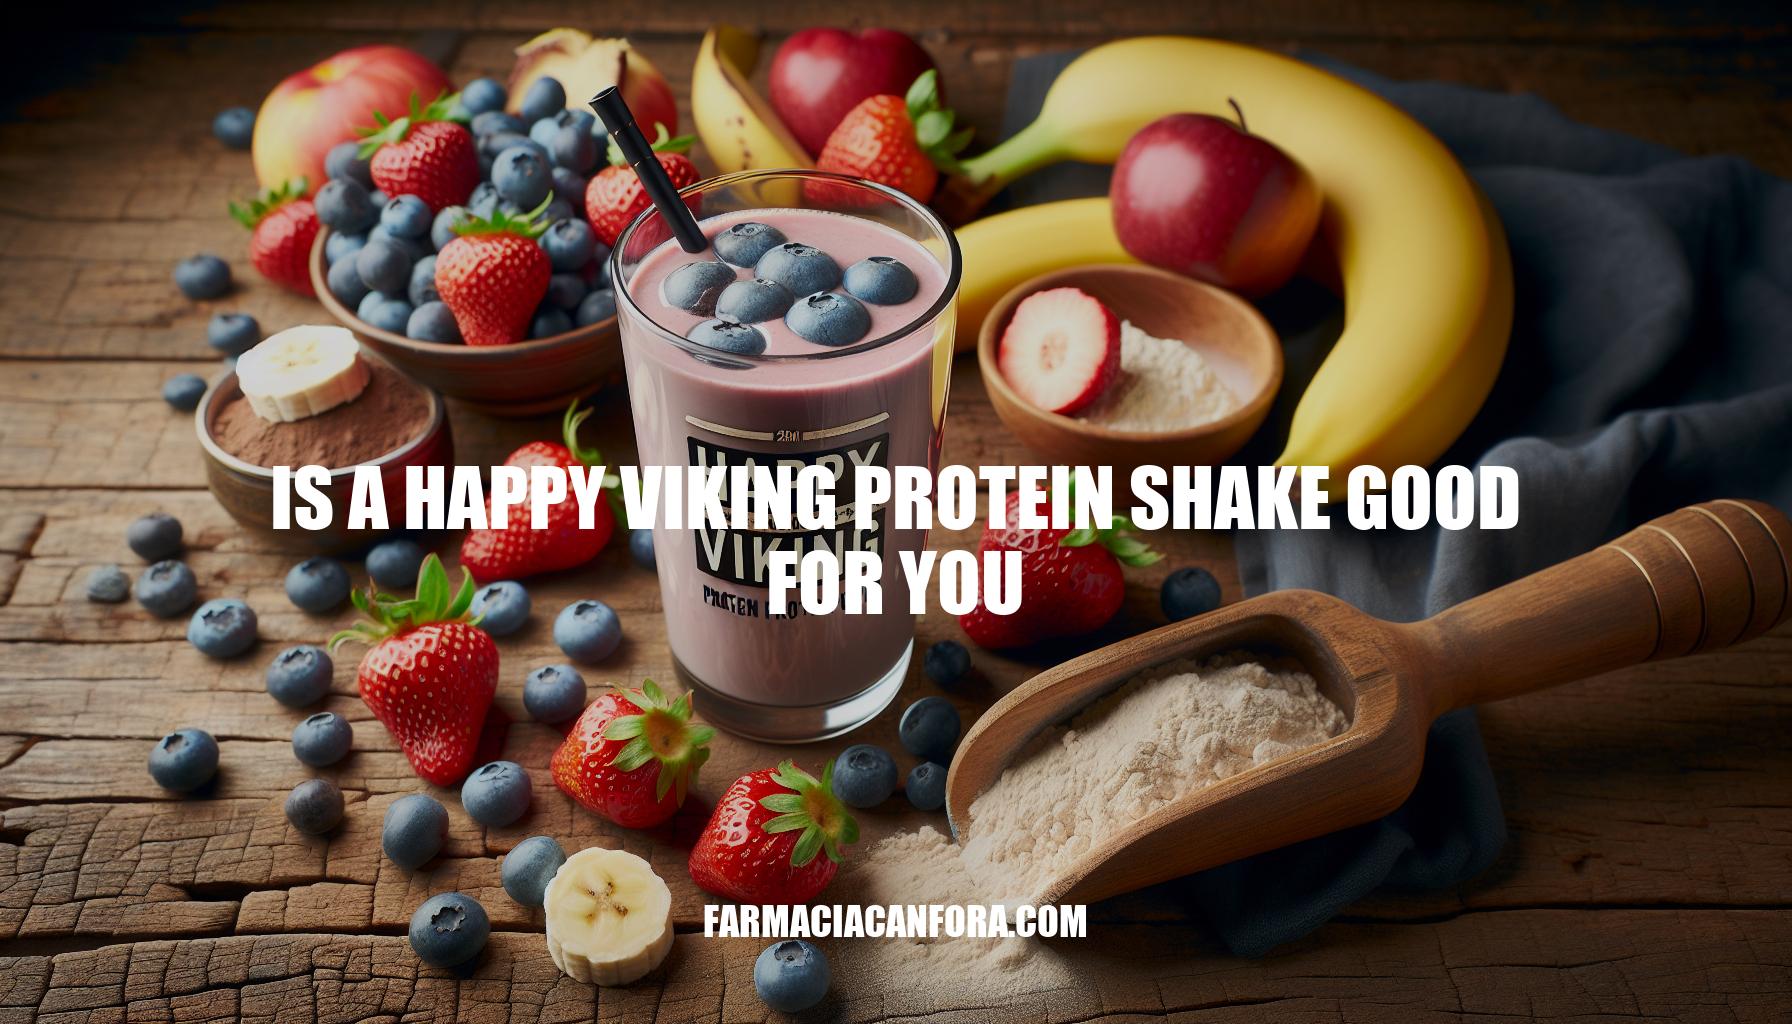 Is A Happy Viking Protein Shake Good For You: Nutrition, Benefits, and Reviews